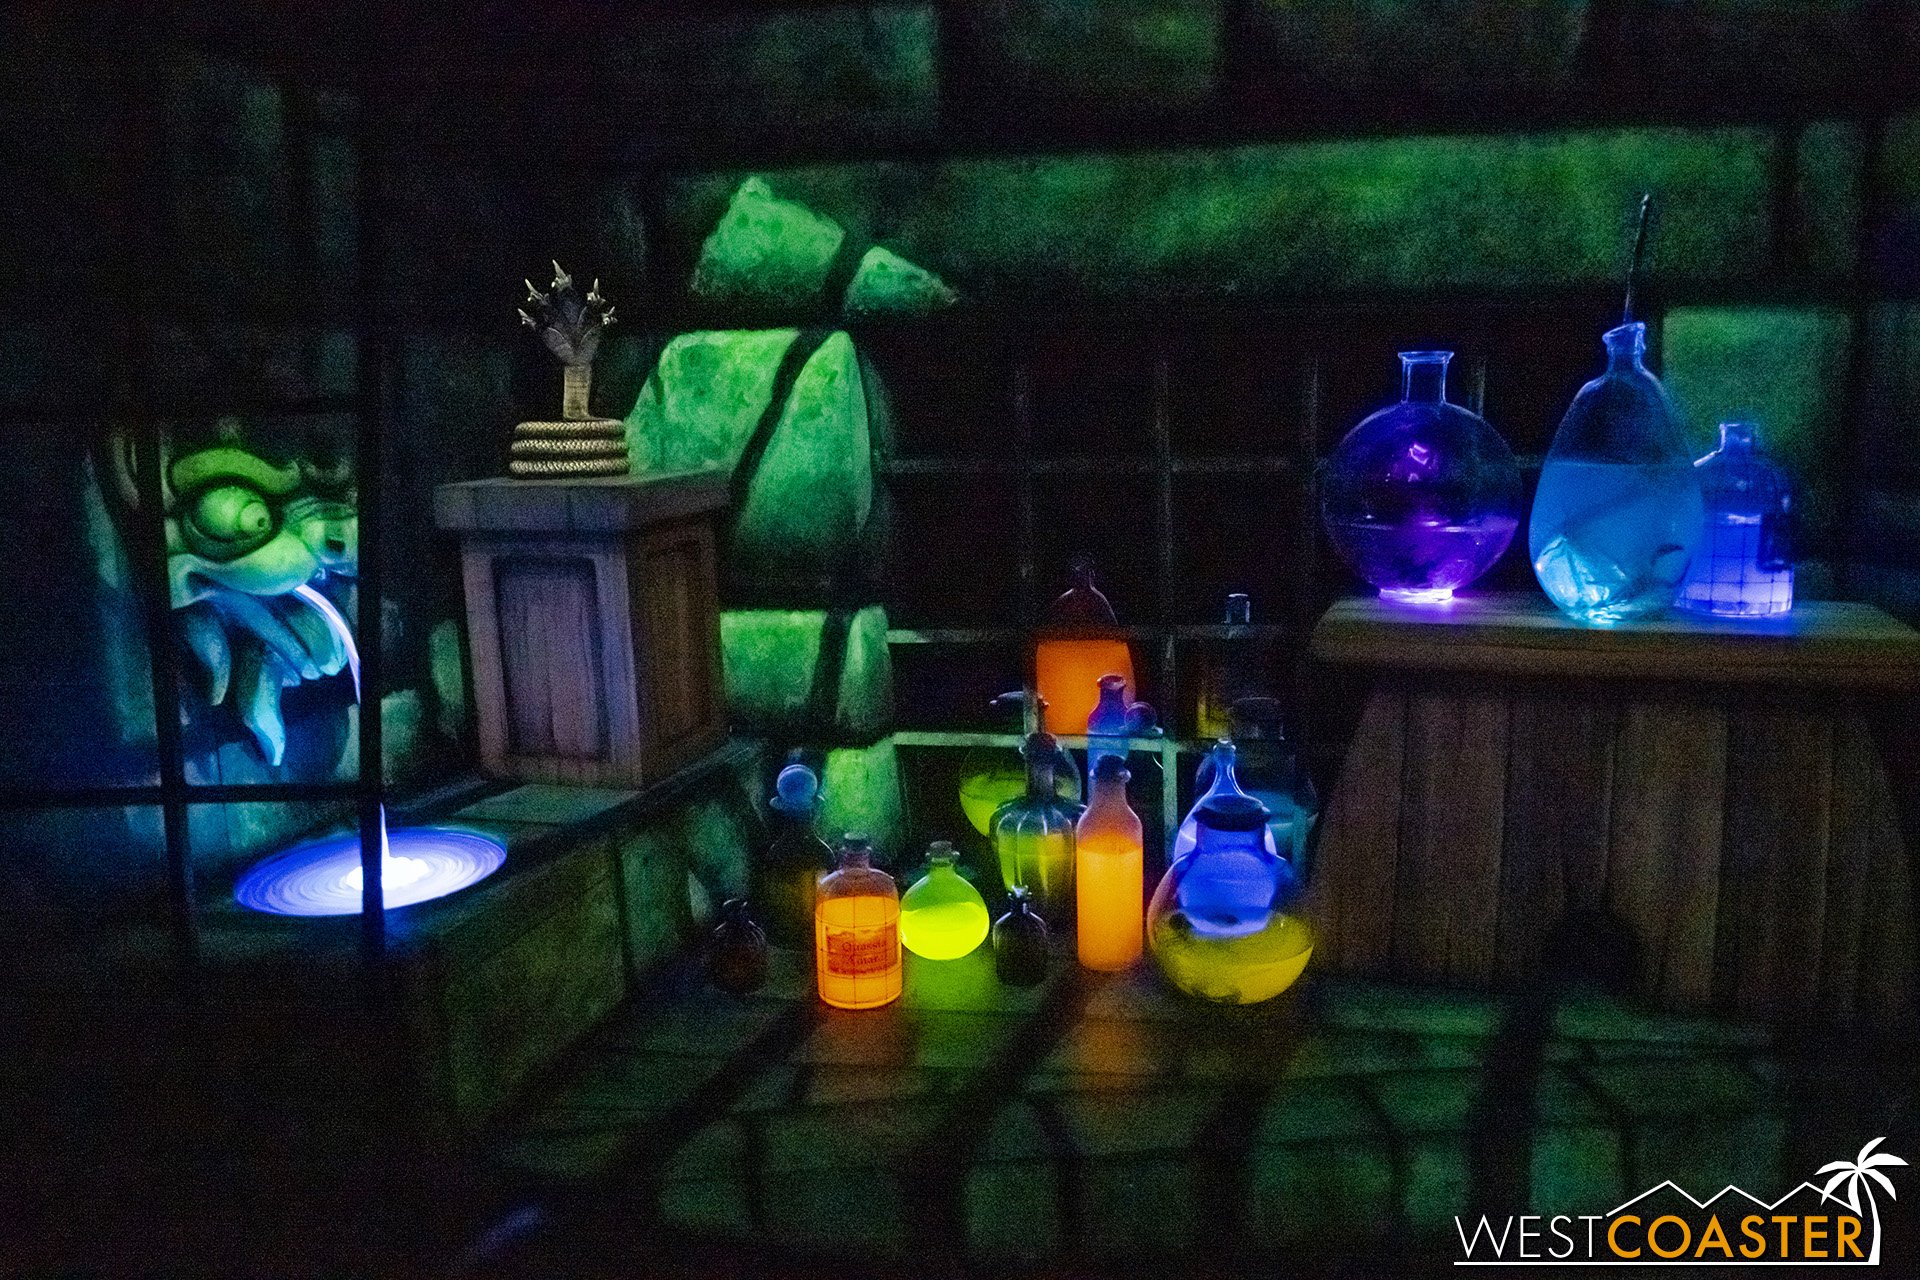  Potions and other dark magic furnishings are more prominent in this redo. 